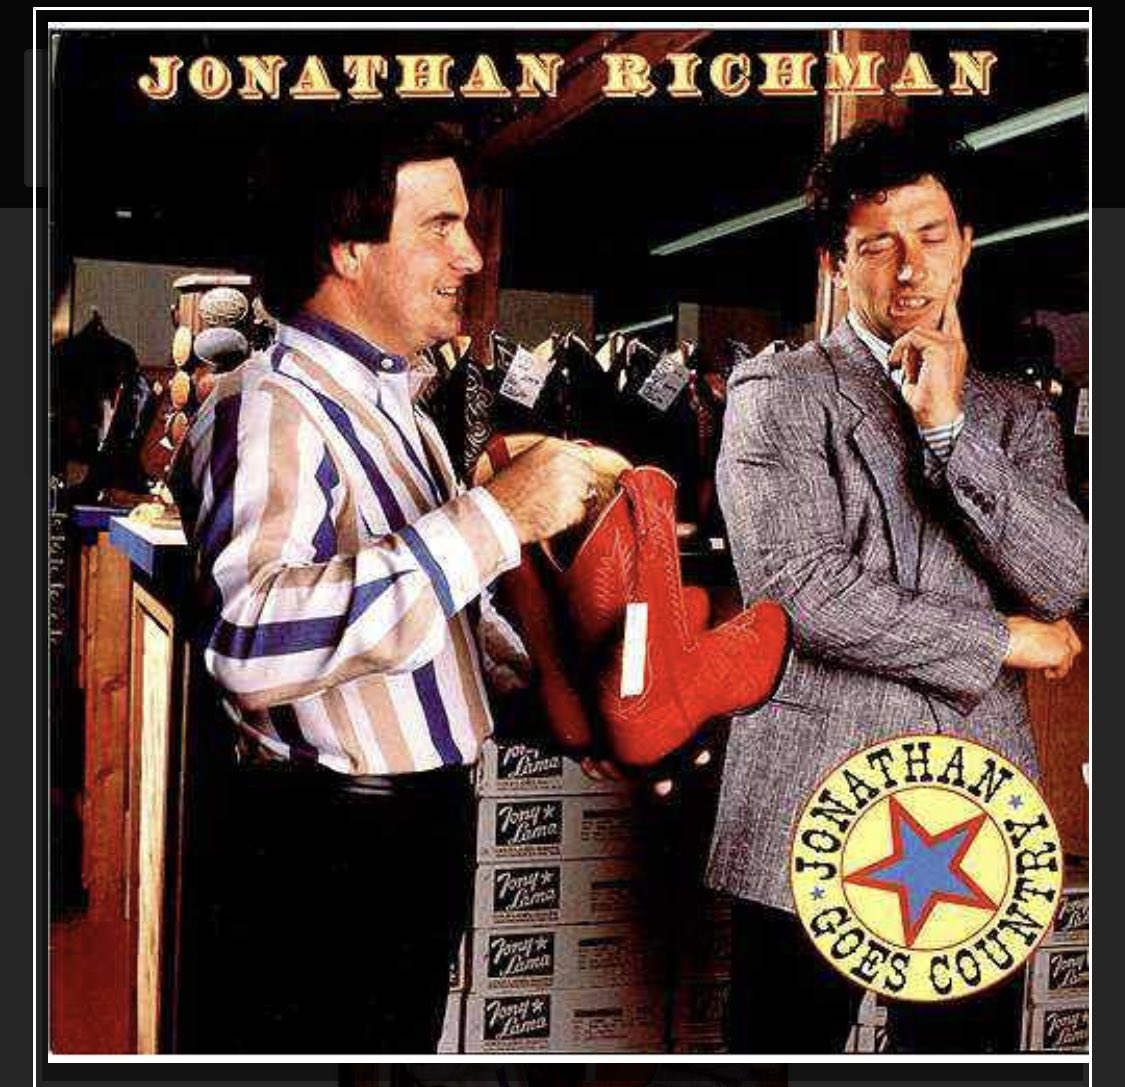 “ You are crazy for taking the bus “
#rsd23 
#jonathanrichman 🕺